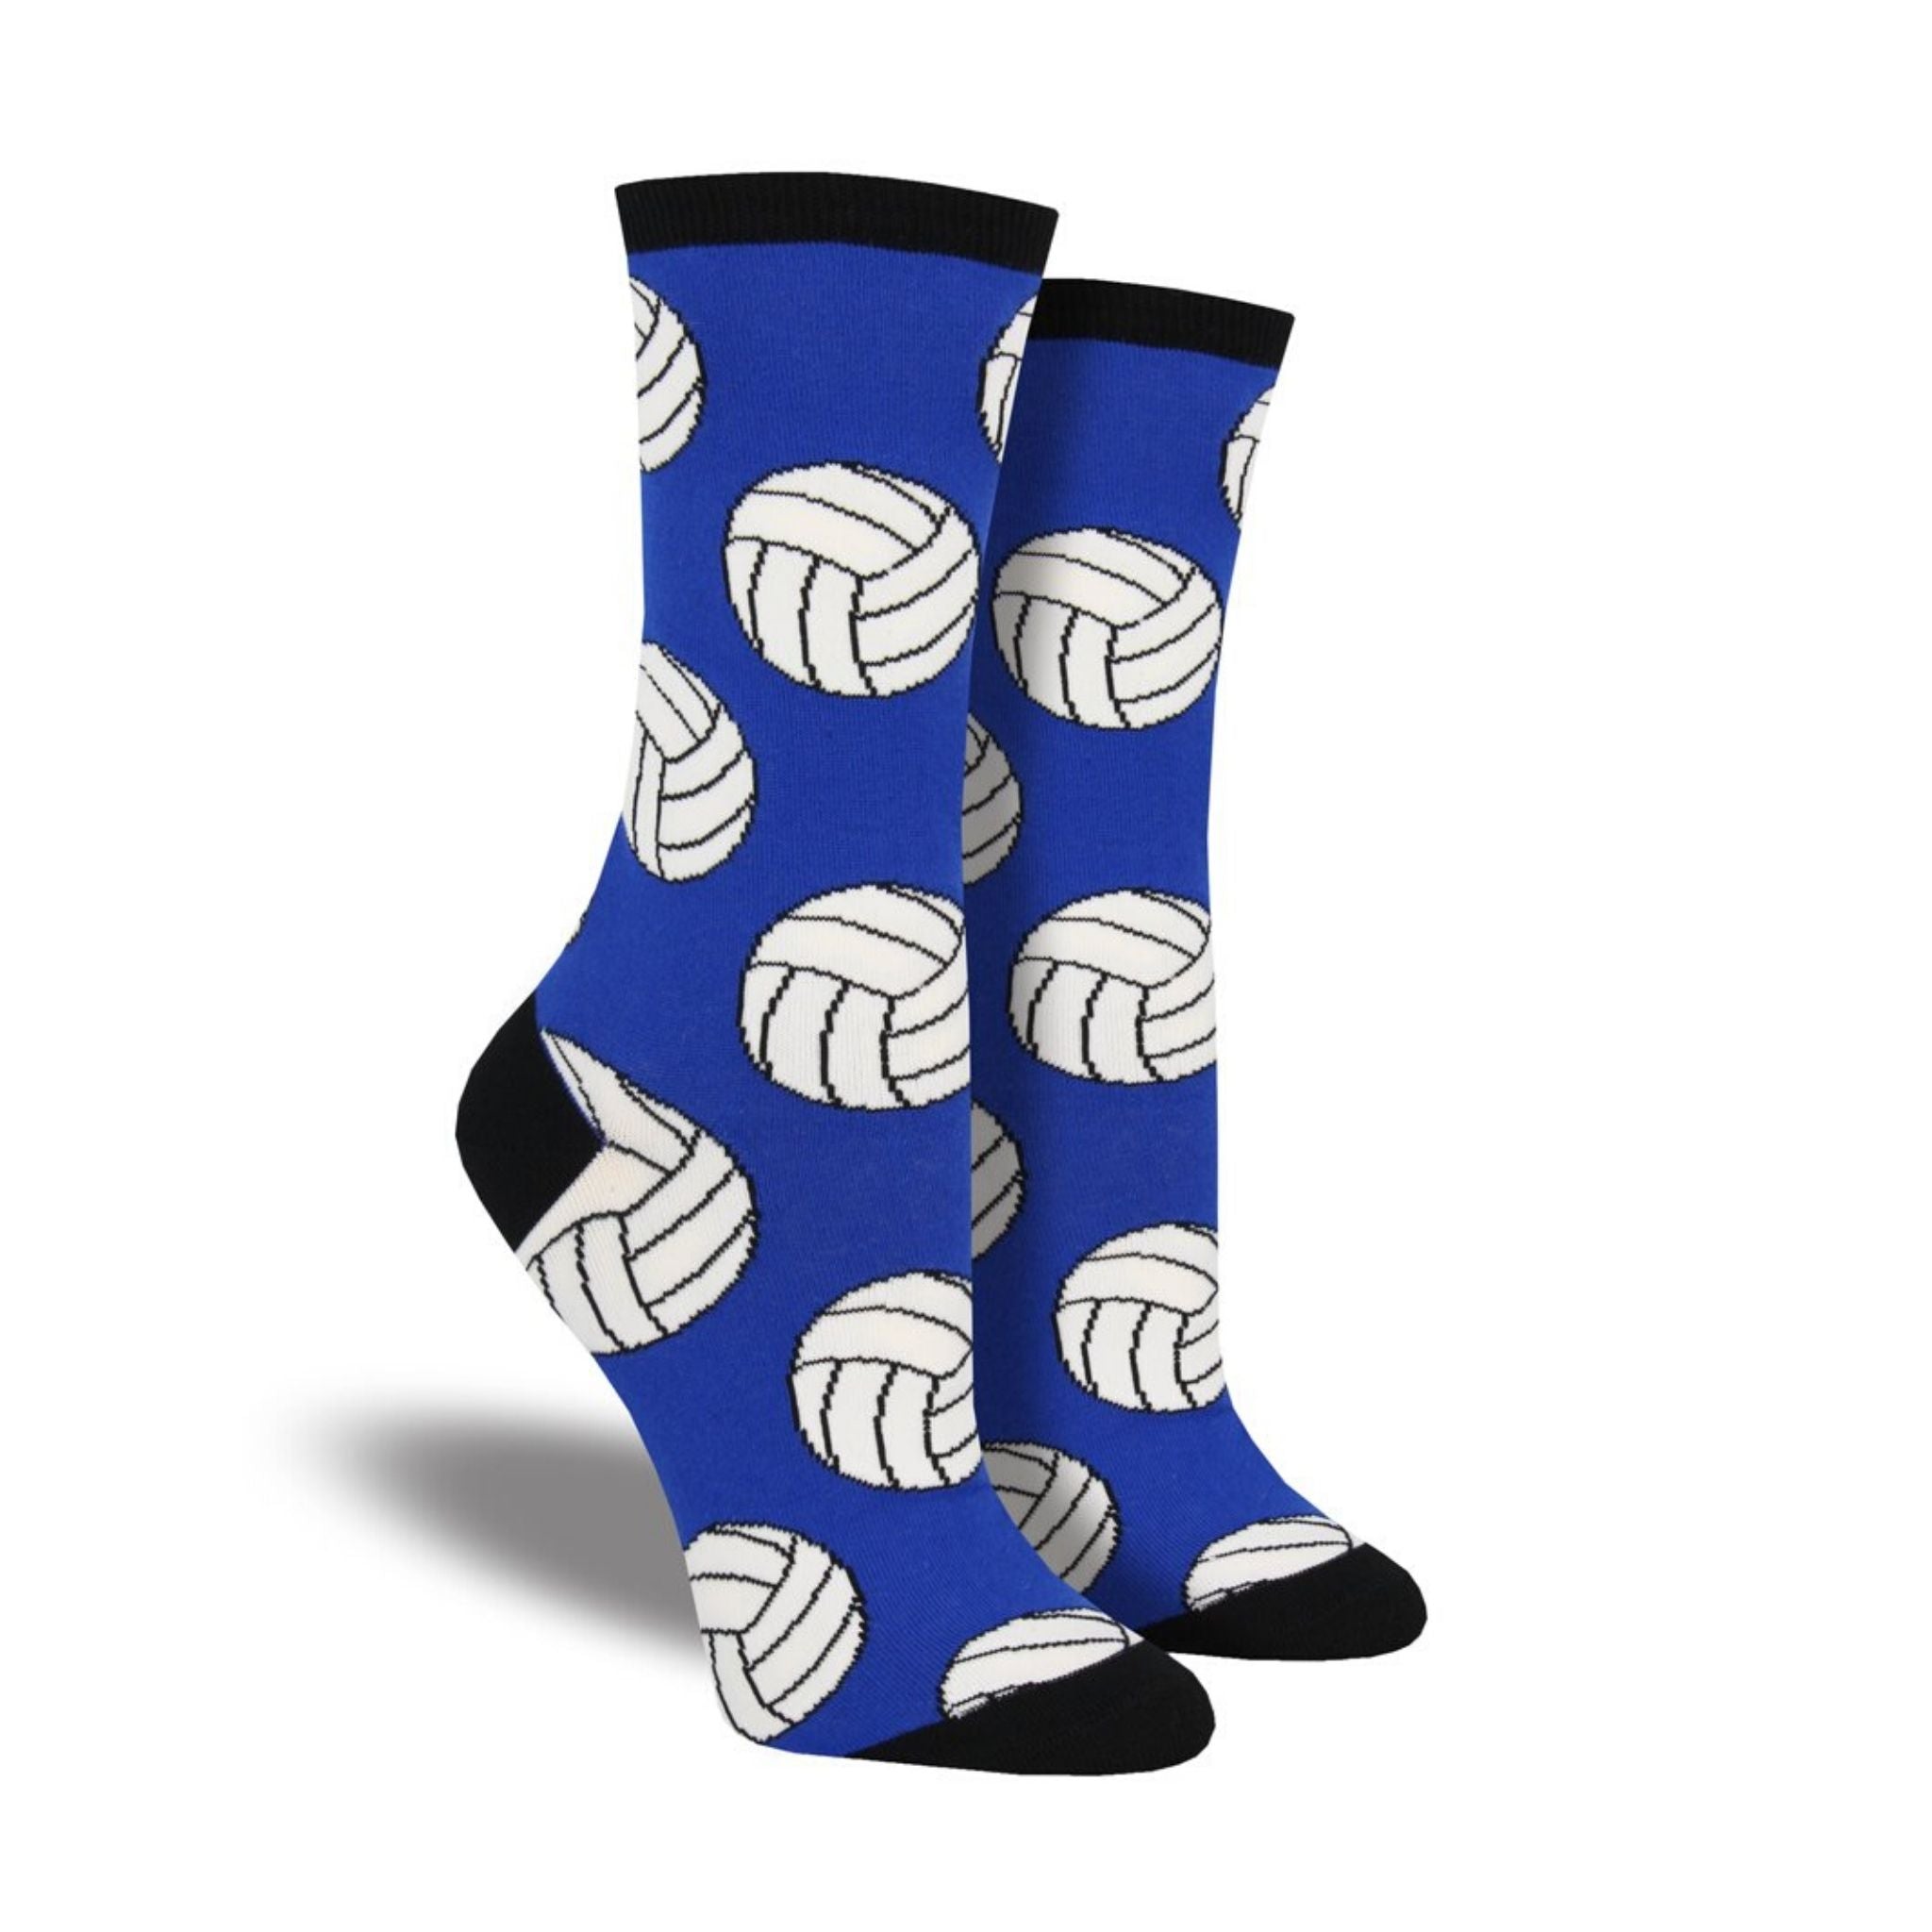 Blue socks featuring volley balls on them